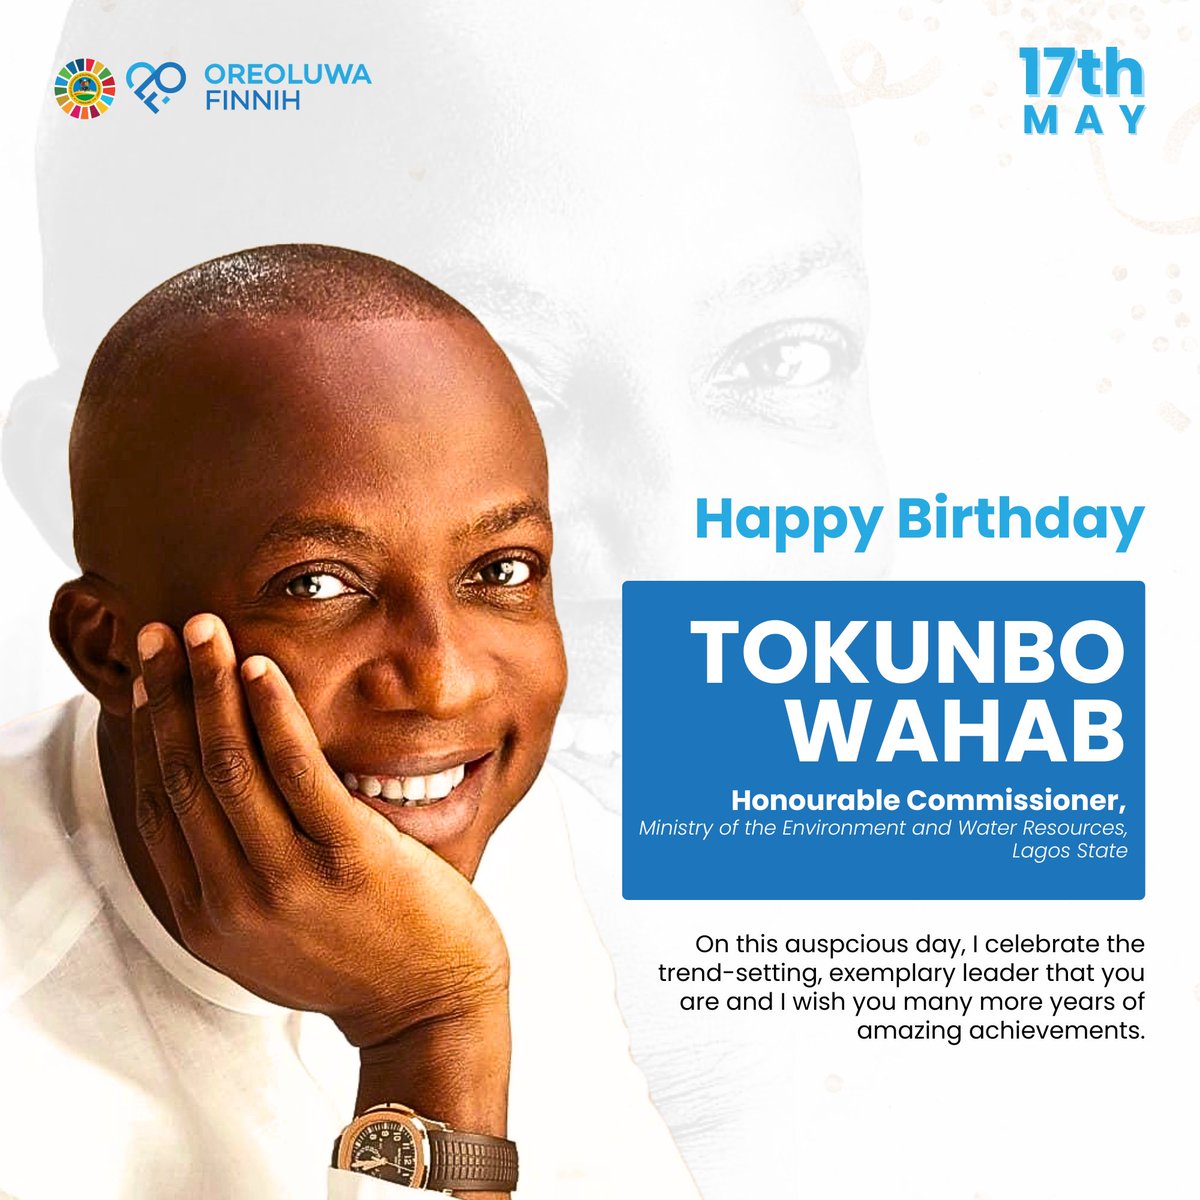 Happy Birthday, HC @tokunbo_wahab. We are grateful for the gift that you are to Lagos State. Thank you for your unwavering commitment to fostering a cleaner, greener and safer Lagos for all. I wish you many happy and prosperous returns of today in excellent health and even